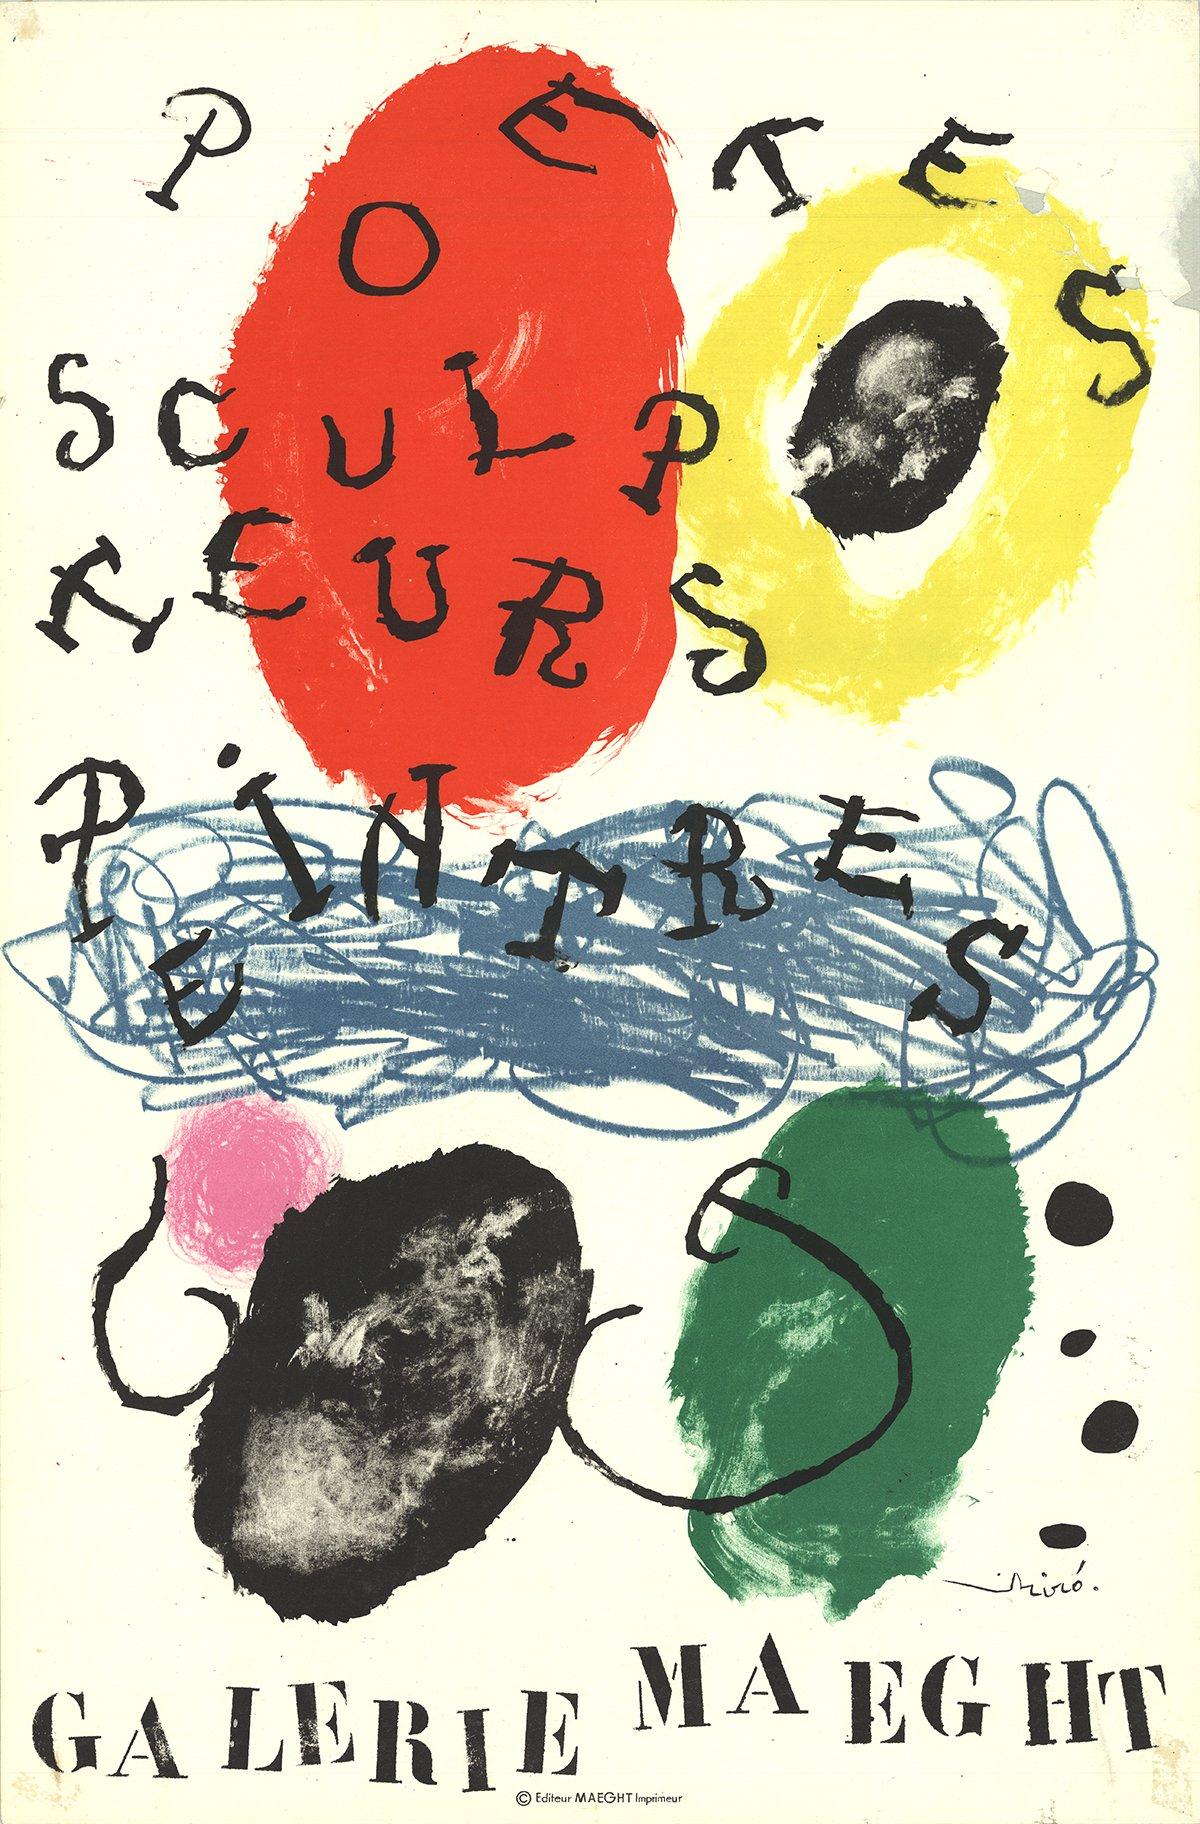 1961 After Joan Miro 'Galerie Maeght (from Album 19)' Surrealism Multicolor  - Print by Joan Miró